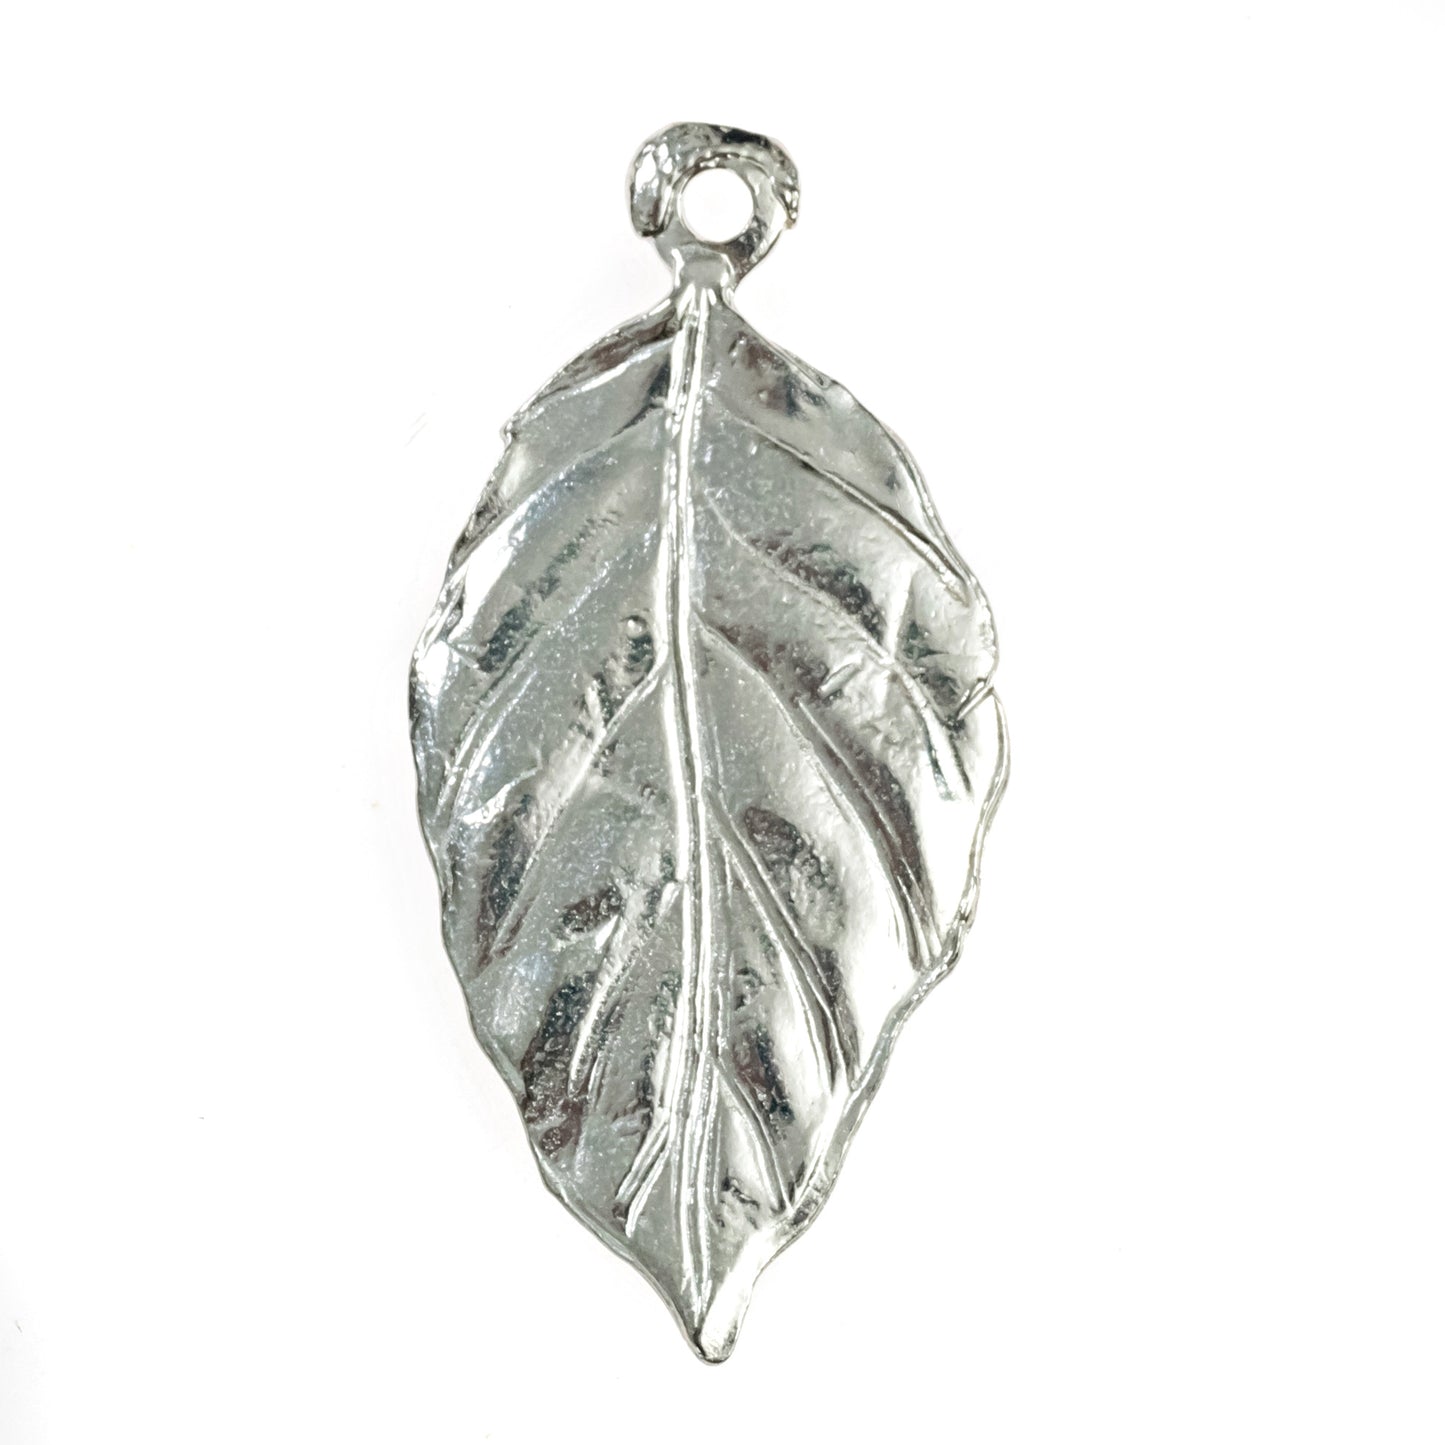 Tobacco Leaf Jewelry - Earrings - Pendant Necklace - Key Chain- Individual Item or Gift Set